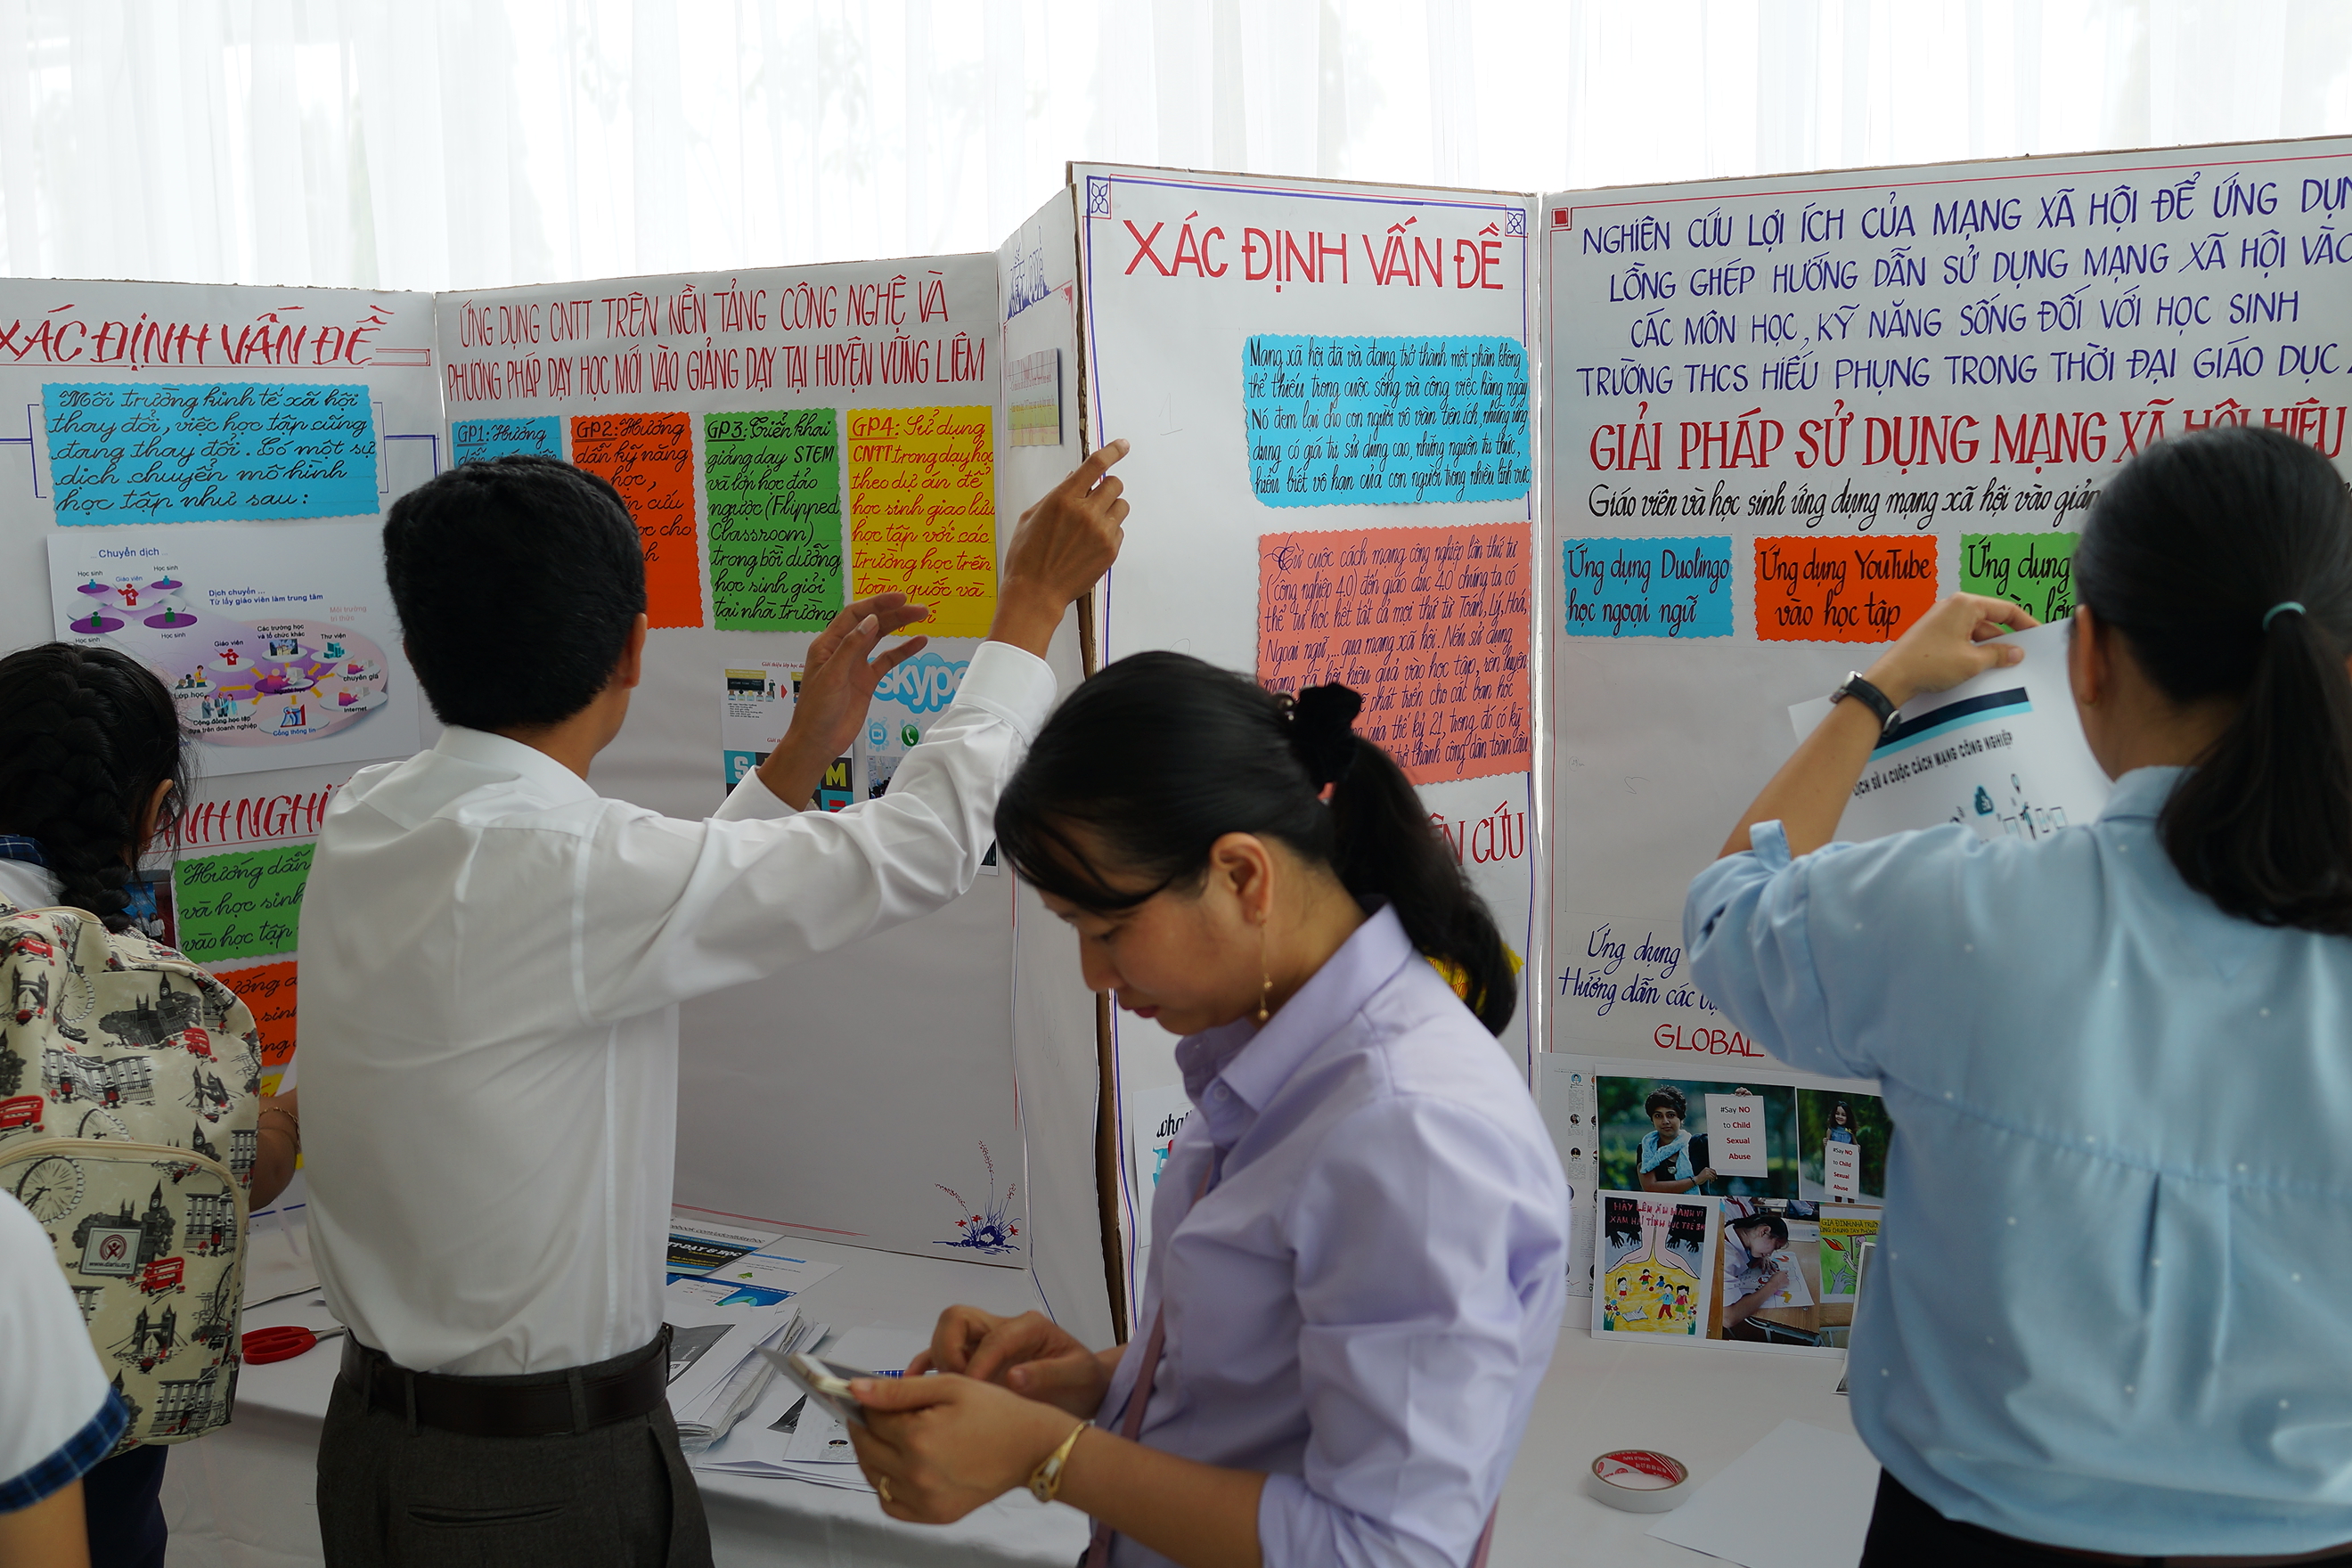 Local teachers and students display innovative educational practices at the ‘Enabling Boat’’s launch ceremony on April 10, 2018. Photo: Tien Bui